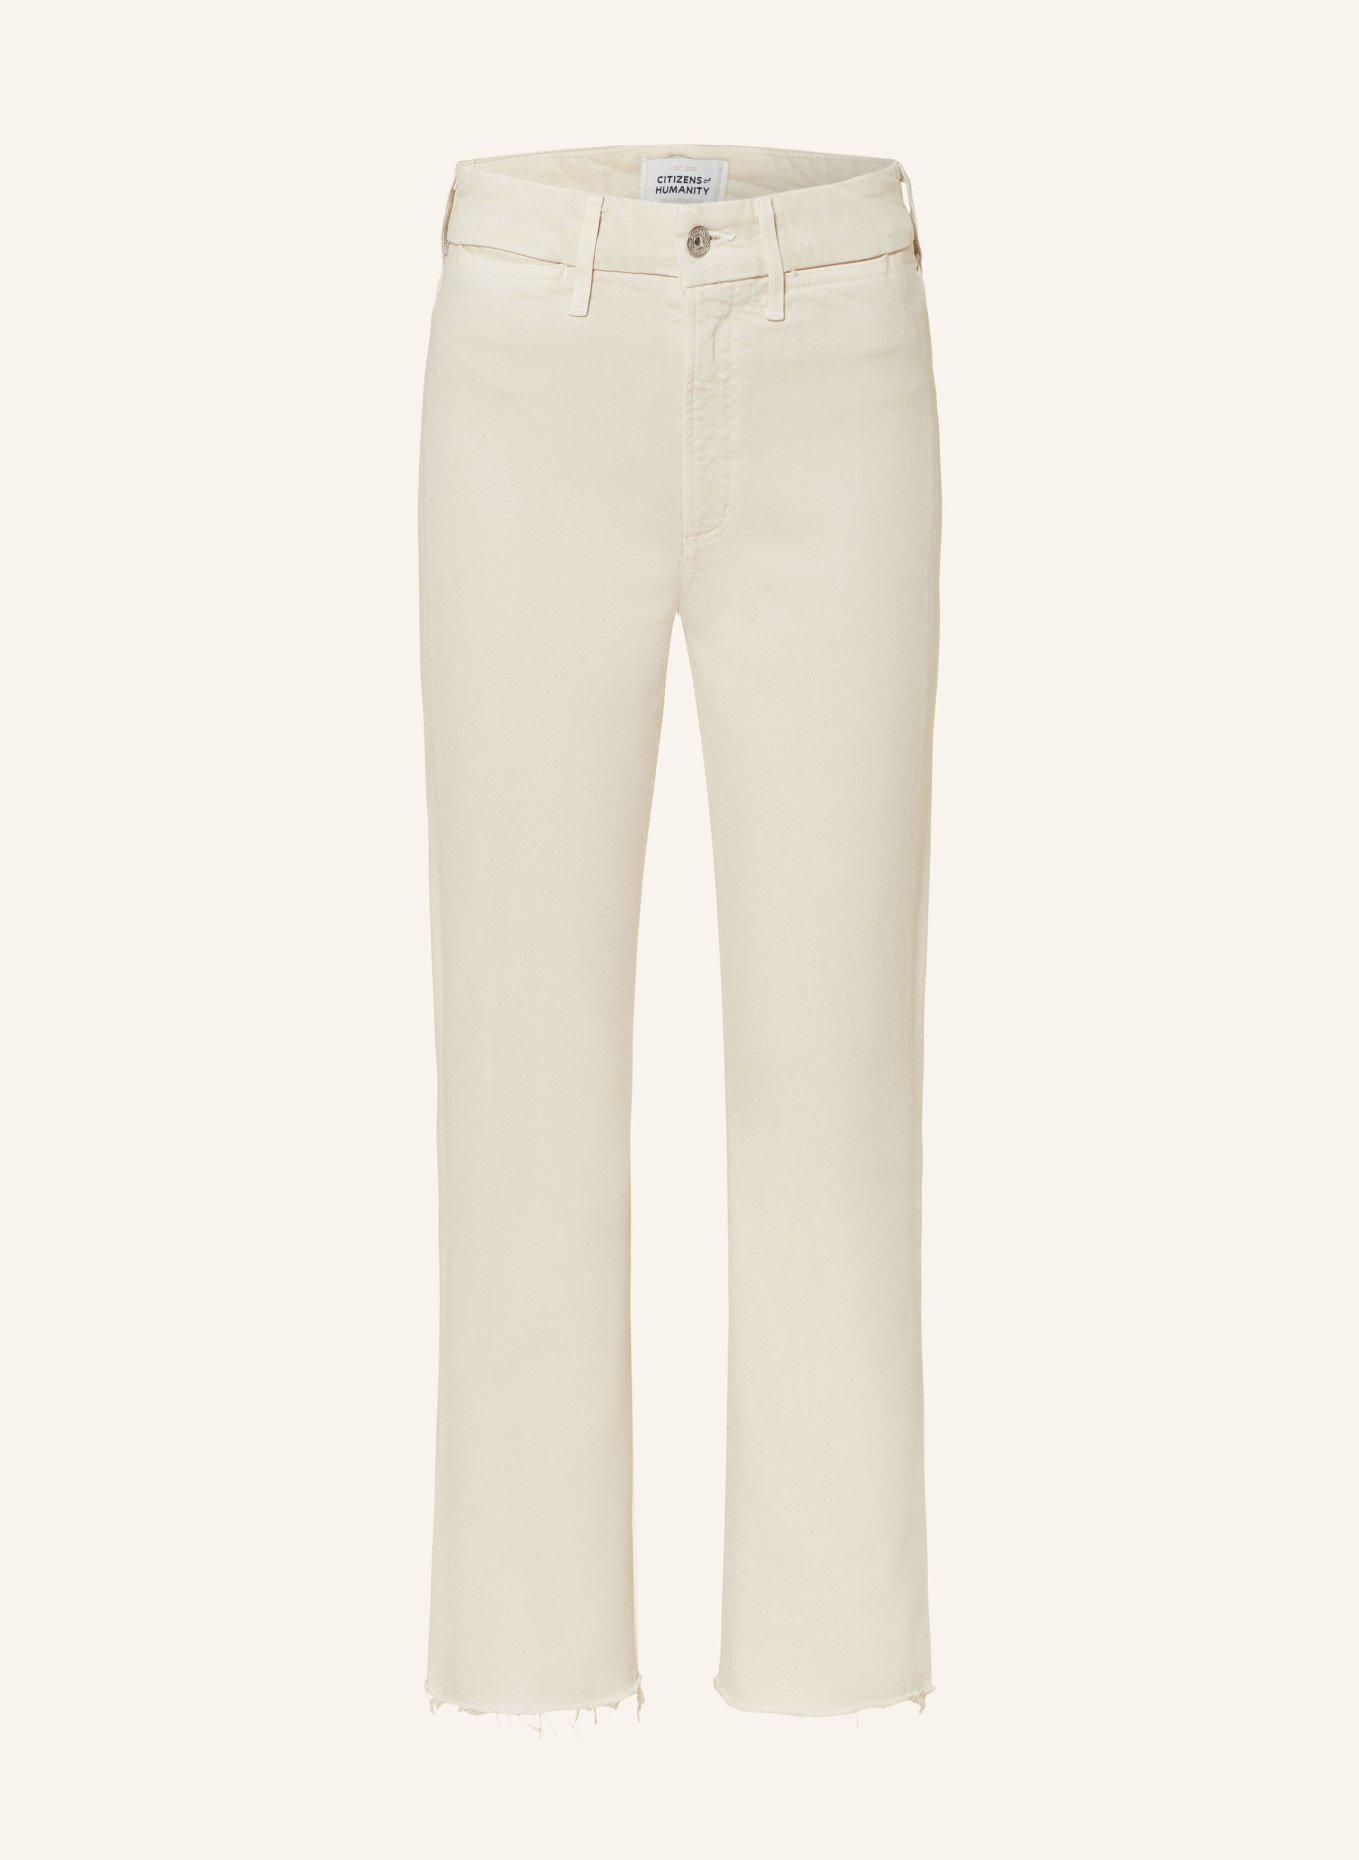 CITIZENS of HUMANITY 7/8-Jeans ISOLA, Farbe: almondette med/light brown (Bild 1)